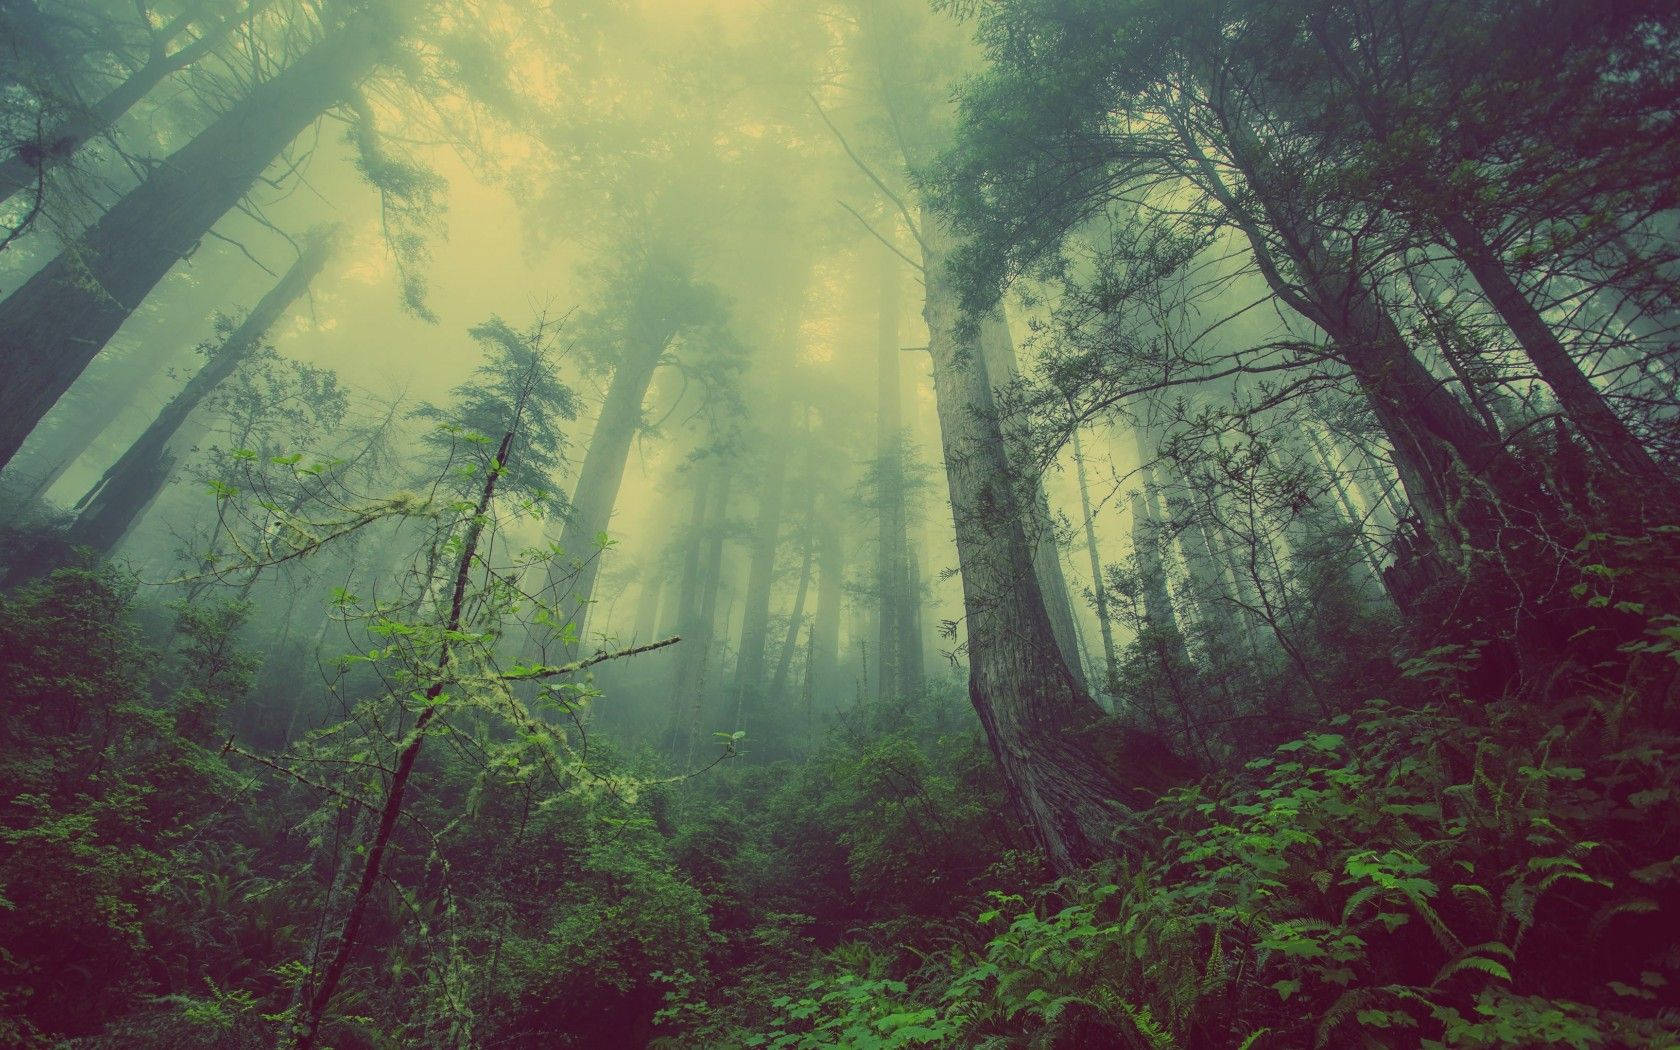 Get lost in the mystifying sight of a dark forest. Wallpaper